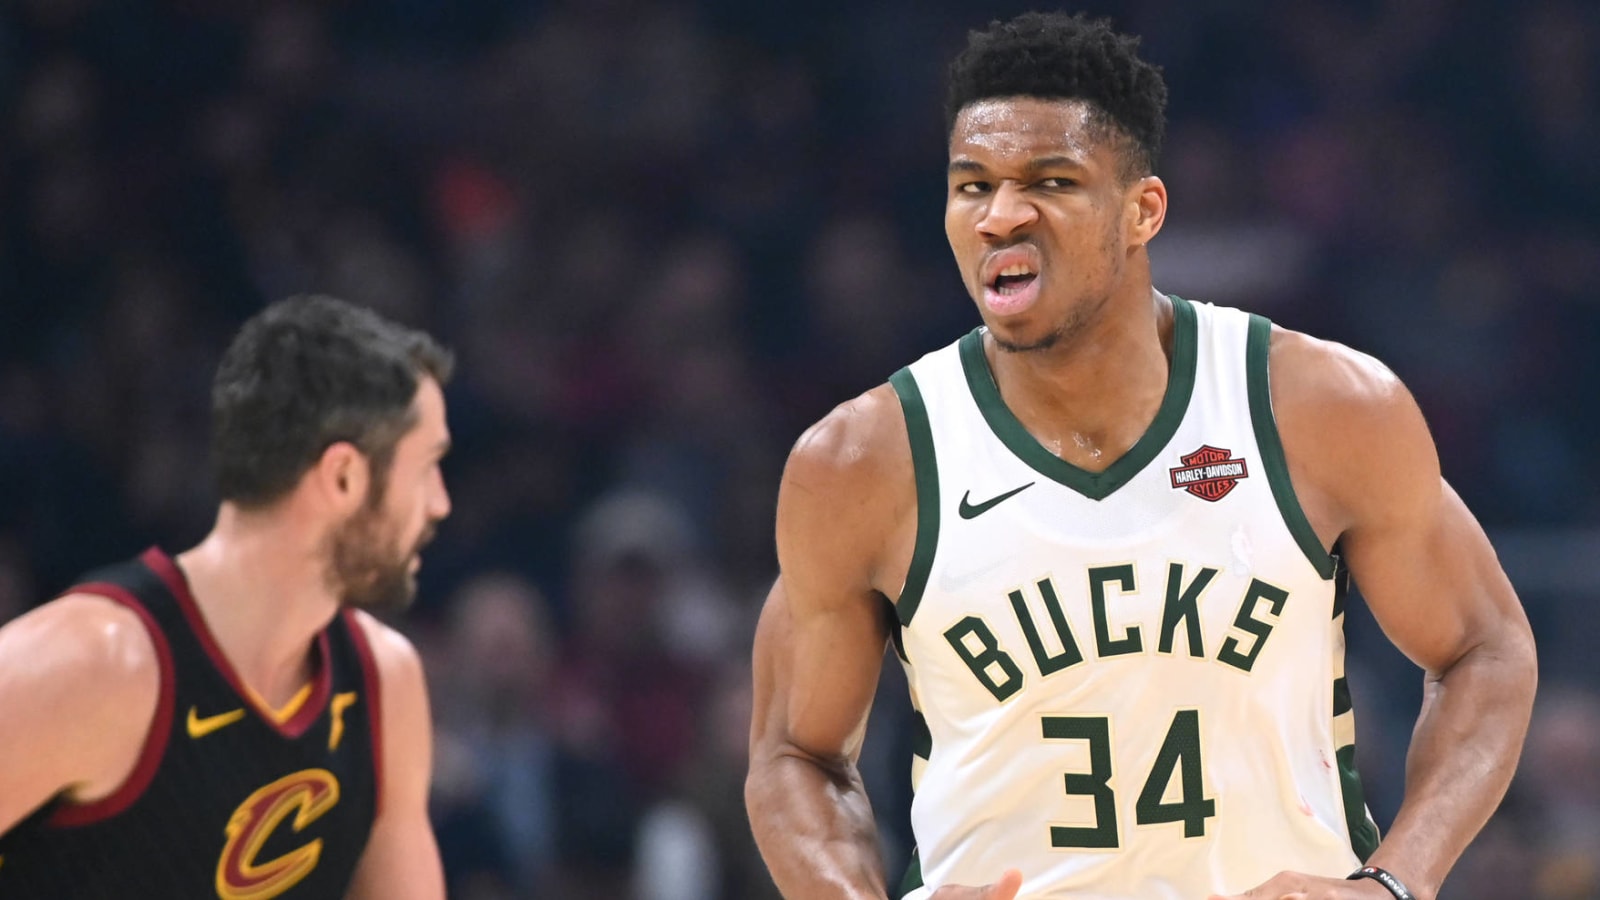 Watch: Giannis Antetokounmpo posterizes Kevin Love on game-opening dunk